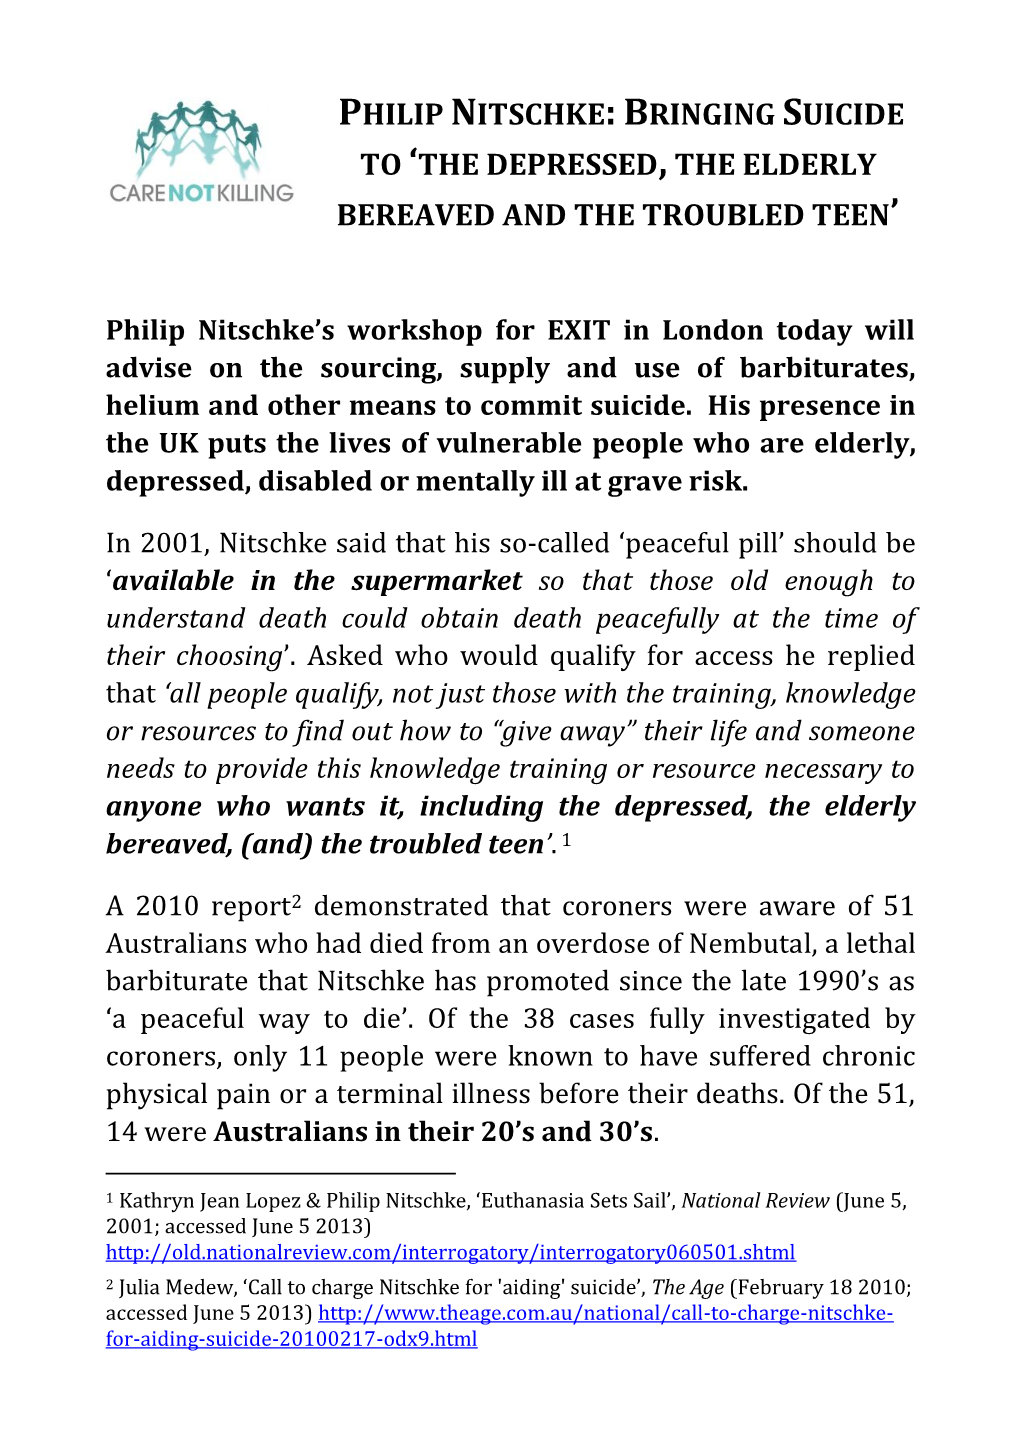 Philip Nitschke: Bringing Suicide to 'The Depressed, the Elderly Bereaved and the Troubled Teen'